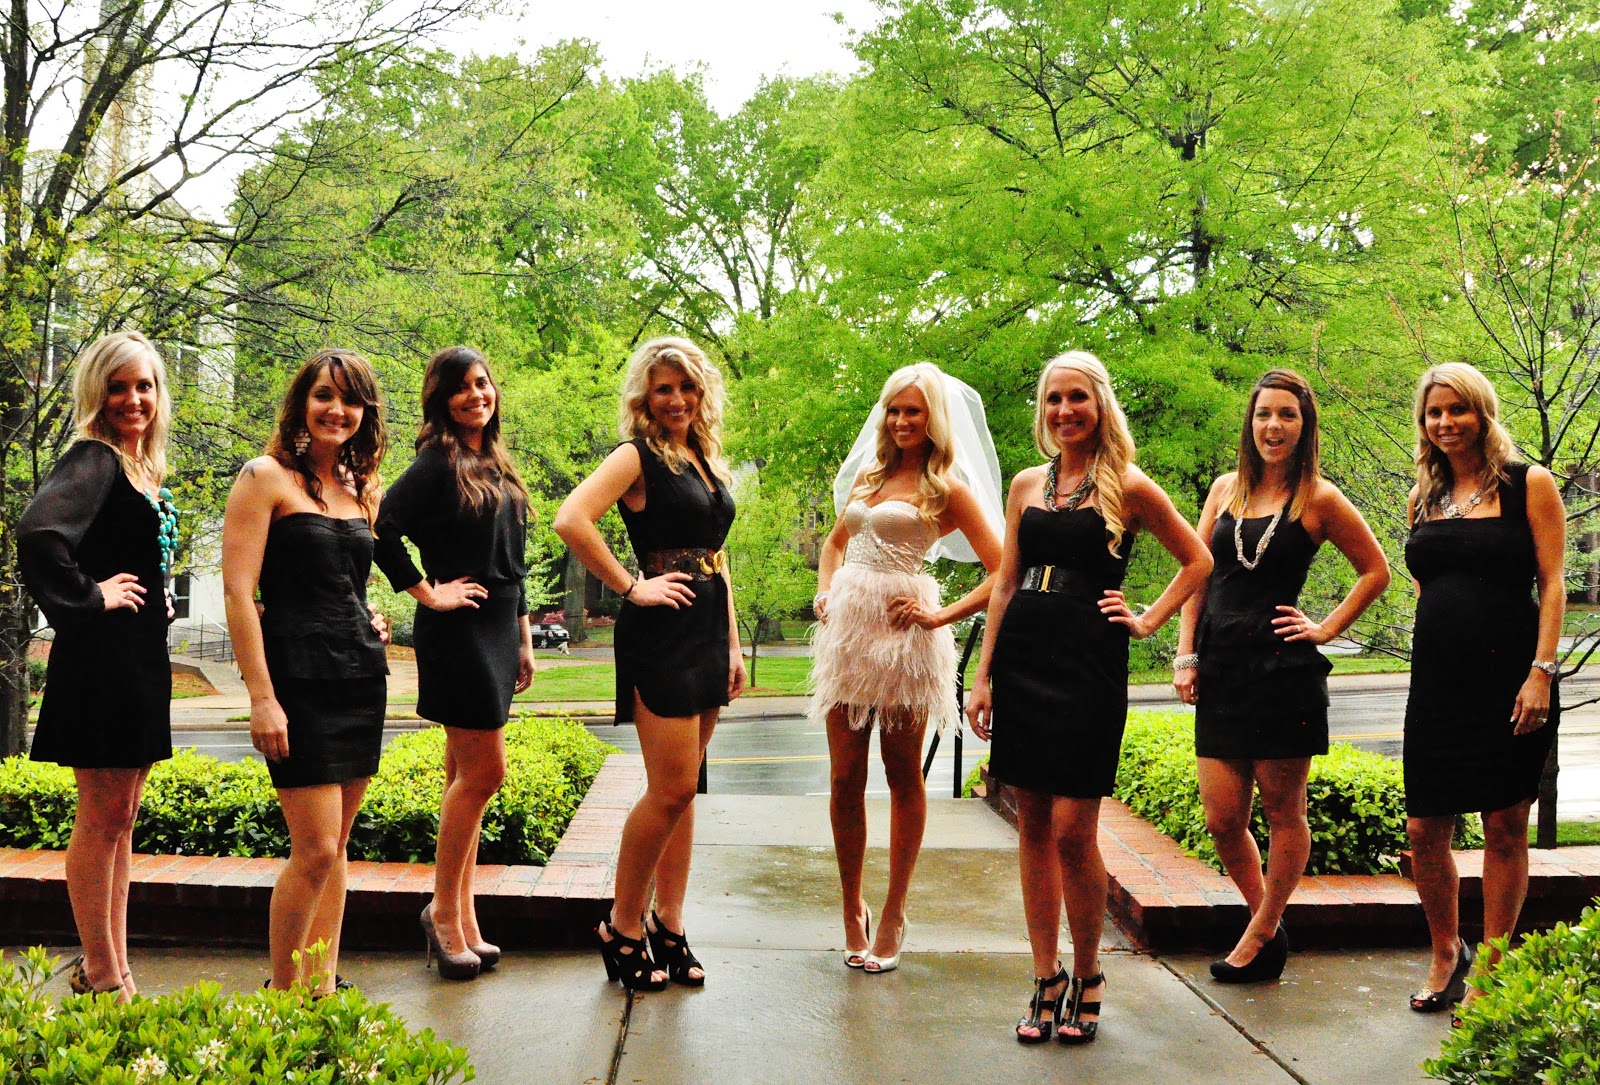 12 Spinster Party Ideas to Rock Her Bachelorette To Kingdom Come